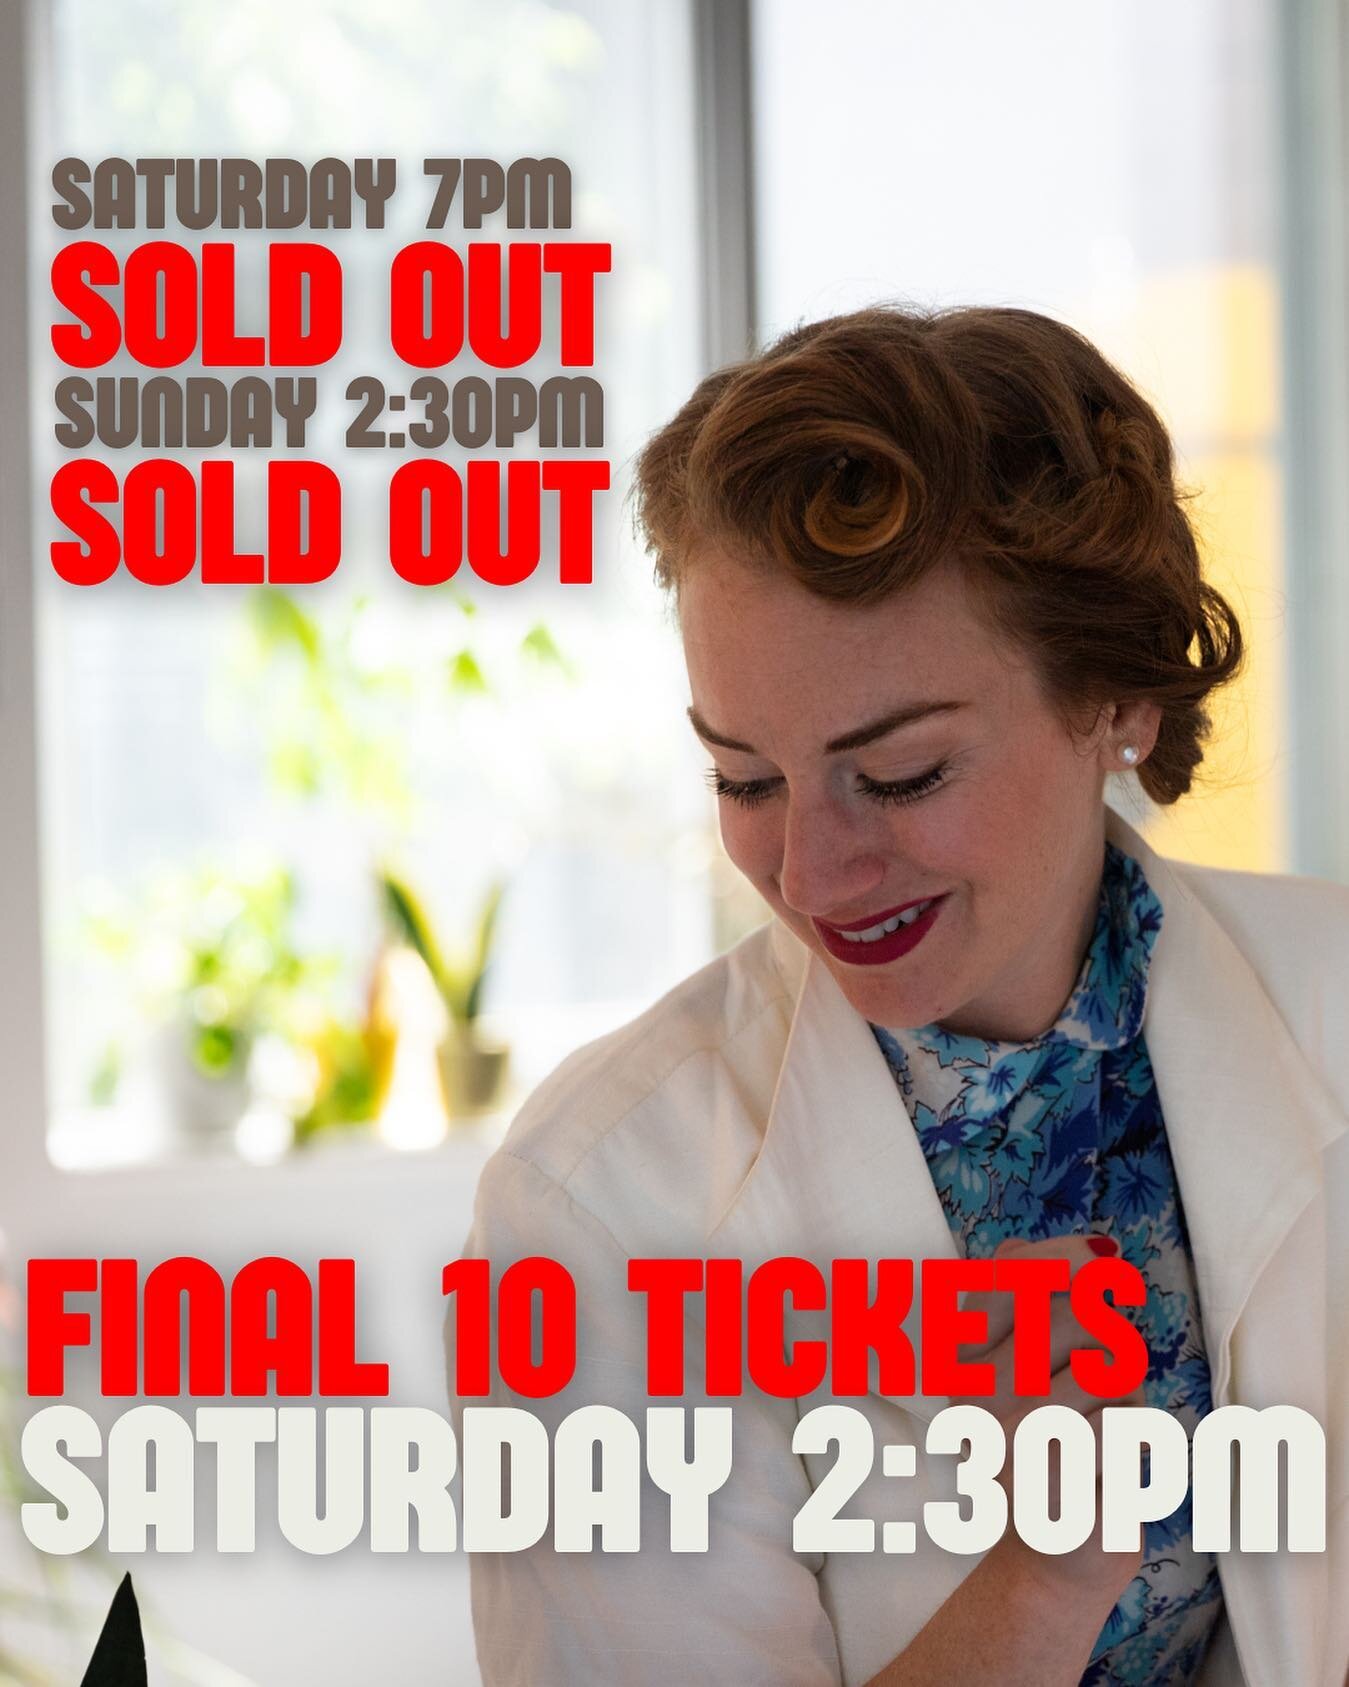 🚨 There are only 10 MORE TICKETS for Suddenly Last Summer!! 🚨

Take a break from the rain and join us at @sorrystudioto this afternoon at 2:30PM! See for yourself what&rsquo;s keeping audiences on the edge of their seats! 

#SuddenlyLastSummer #Ten